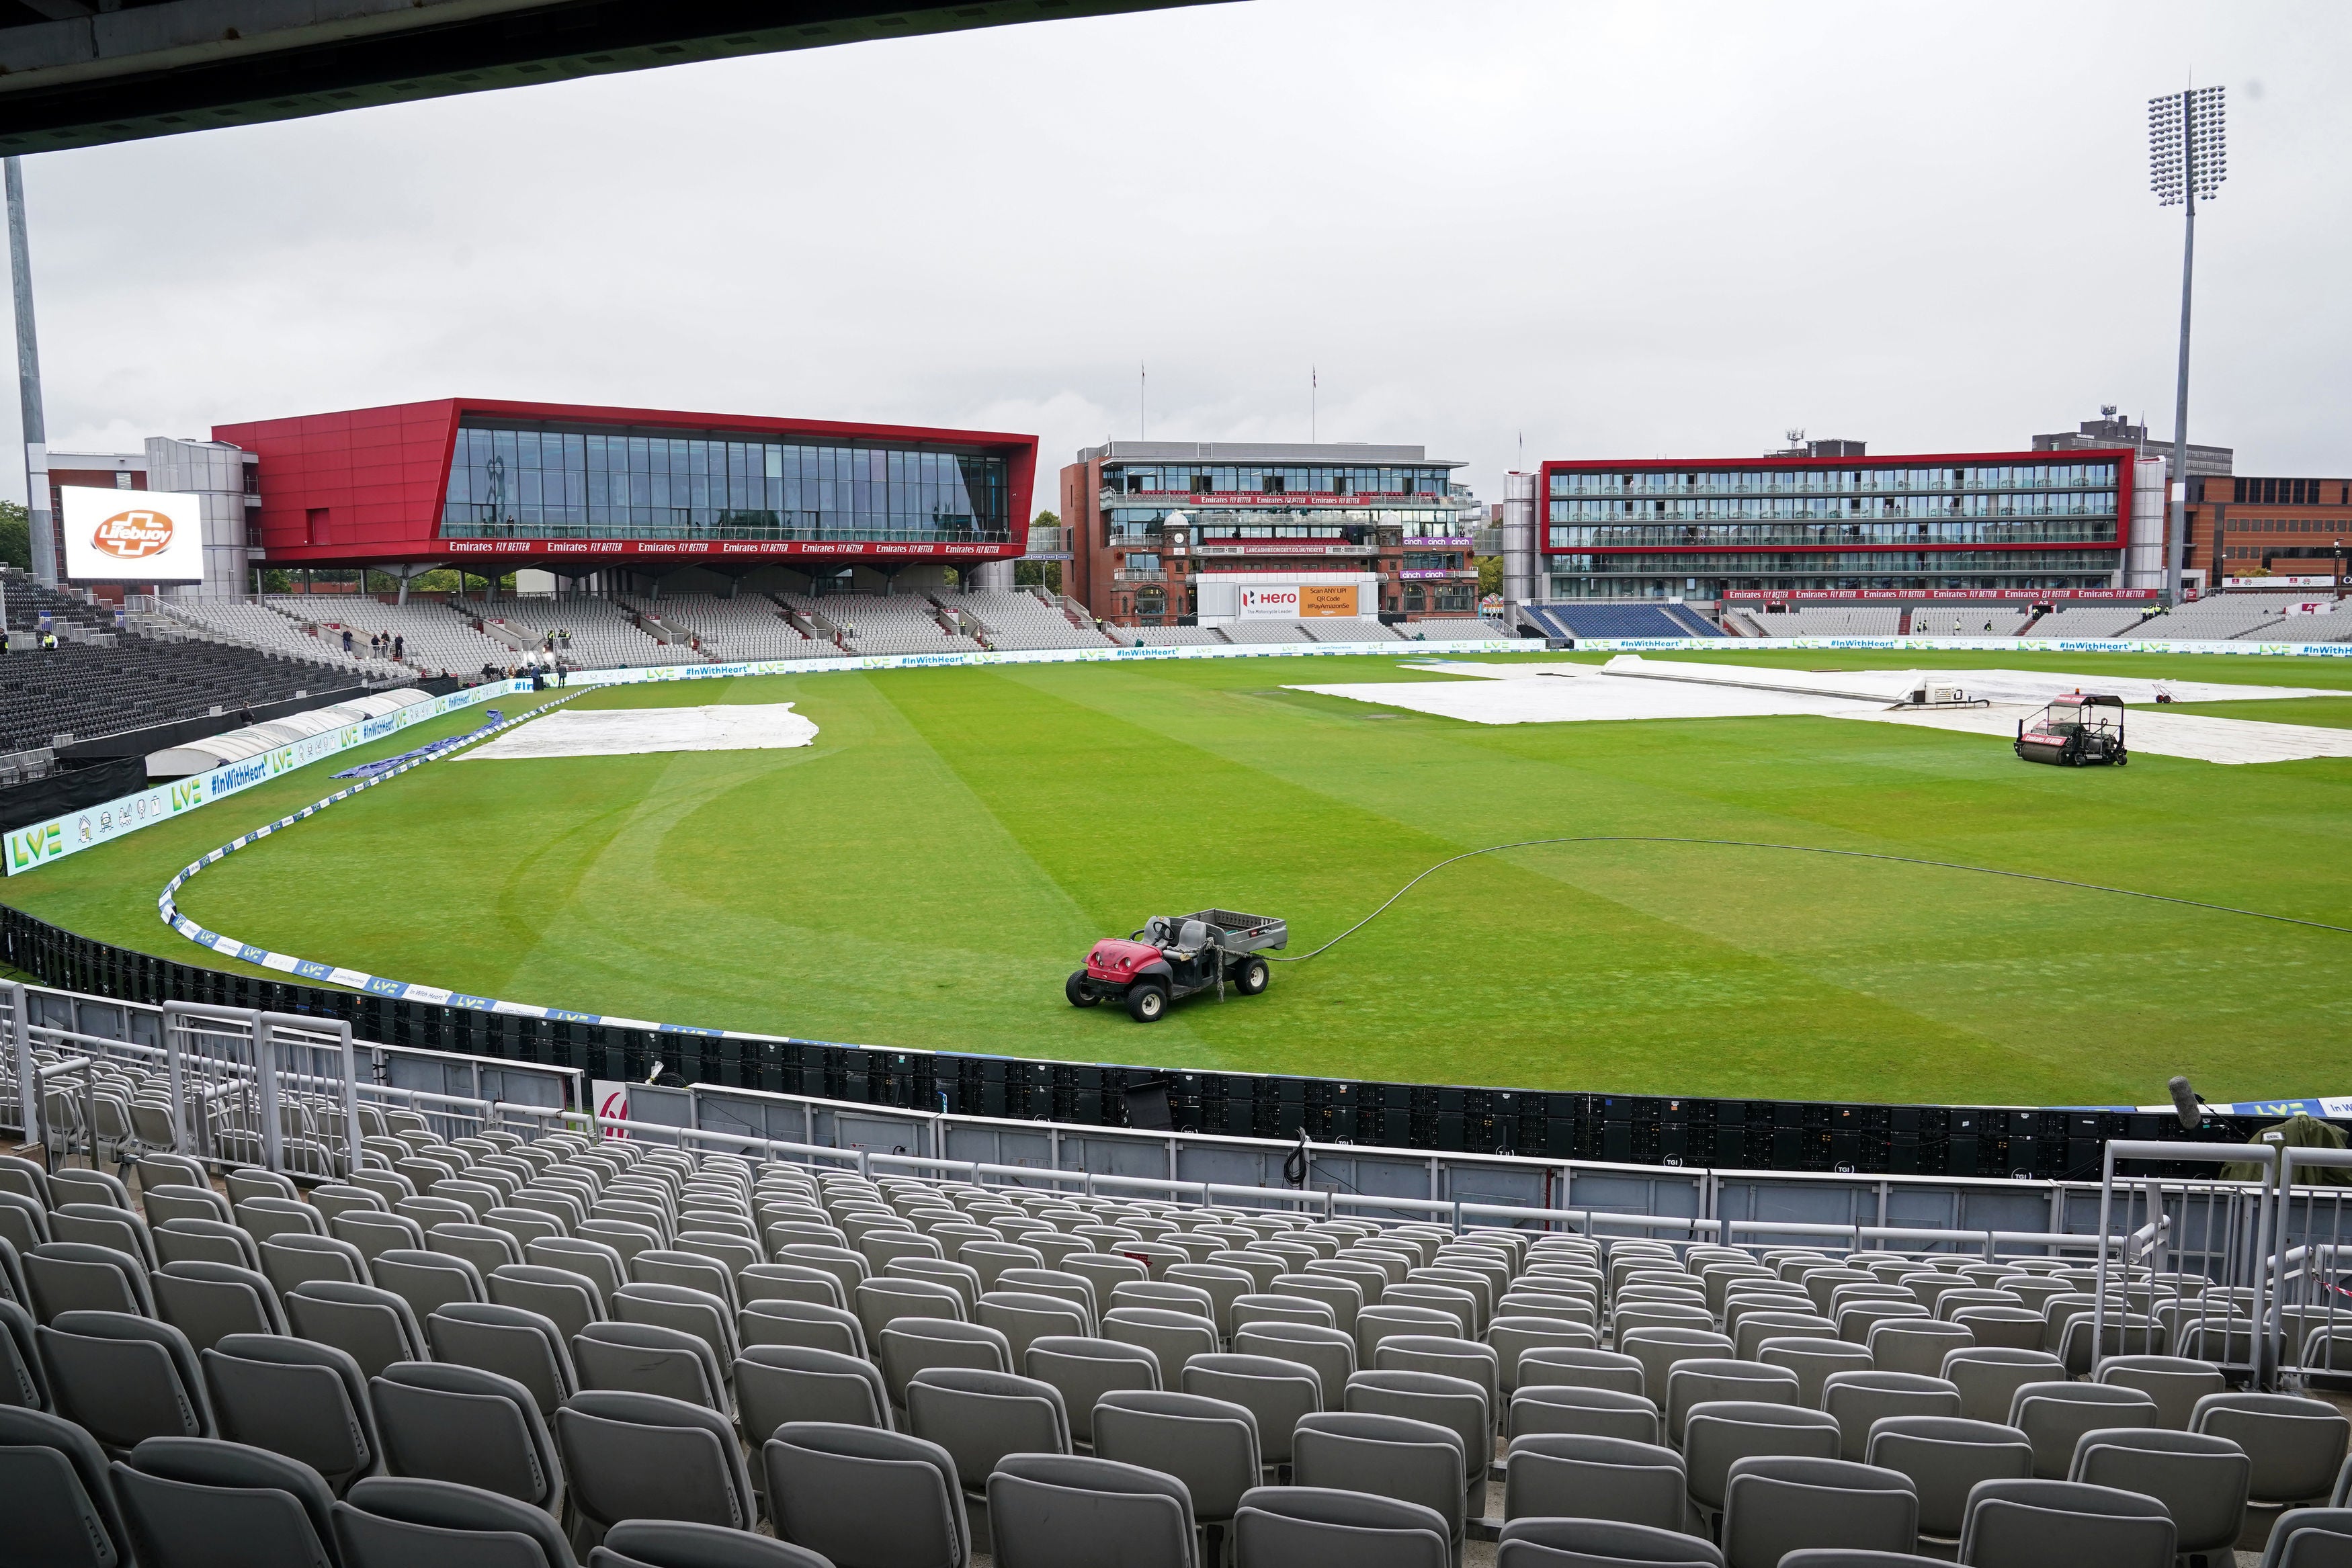 The Test match at Old Trafford has been cancelled